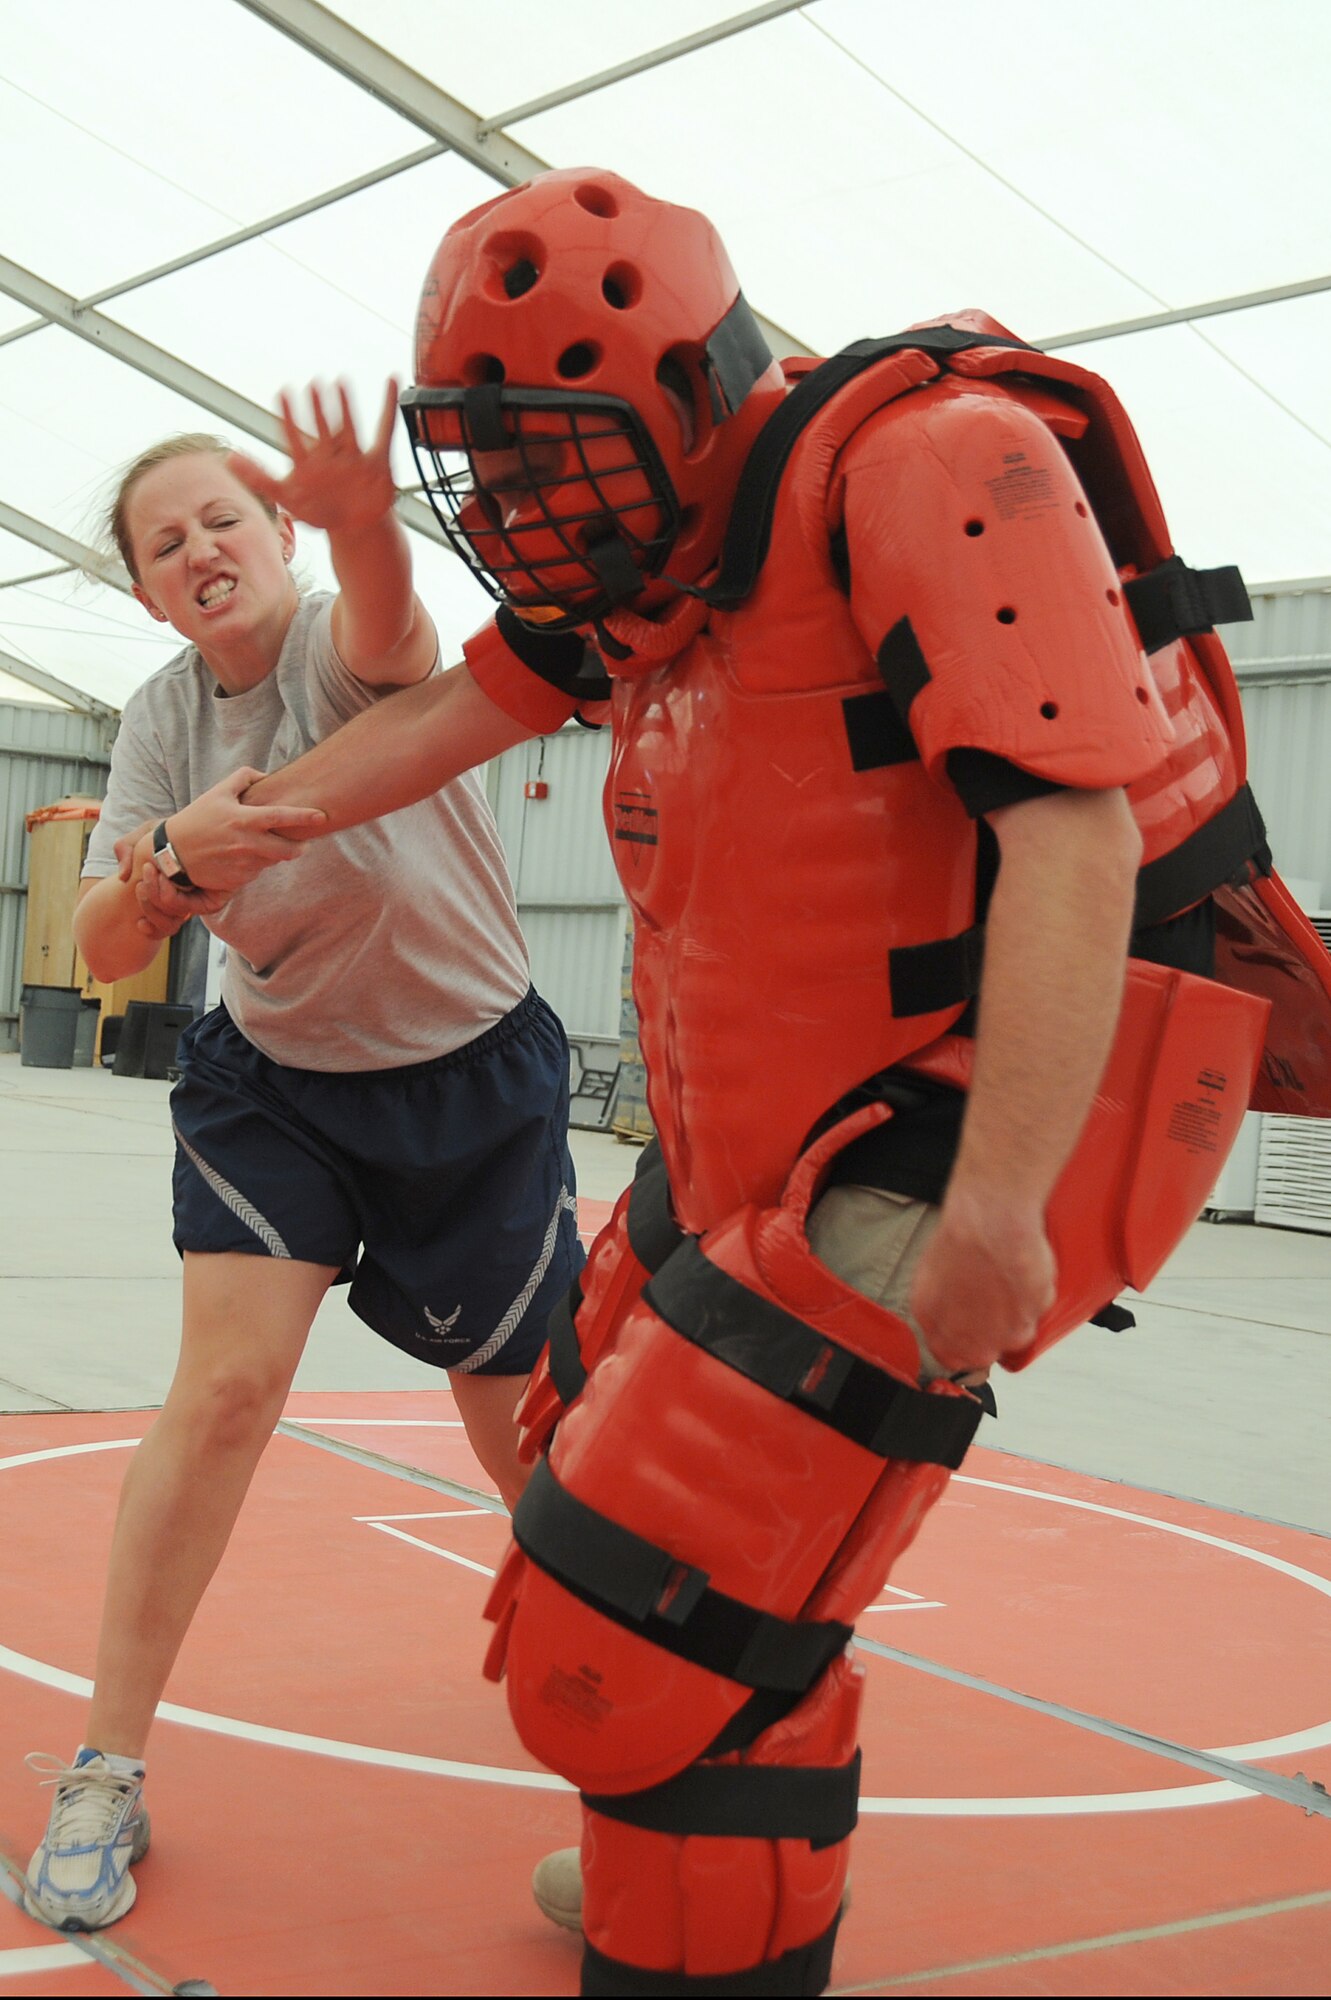 Capt. Jennifer Pearson, 380th Air Expeditionary Wing, Public Affairs Officer, gives a blow to the head of Mr. Rick Baldwin, a Northrop Grumman contractor posed as the "red man attacker" during self-defense training, April 18 at an undisclosed location in Southwest Asia. The Sexual Assault Response Coordinator (SARC) sponsored the training that gave students the chance to learn techniques to defend themselves from attack. Captain Pearson is deployed from Langley AFB, Va. and hails from Hampton, Va. (U.S. Air Force photo by Senior Airman Brian J. Ellis) (Released)